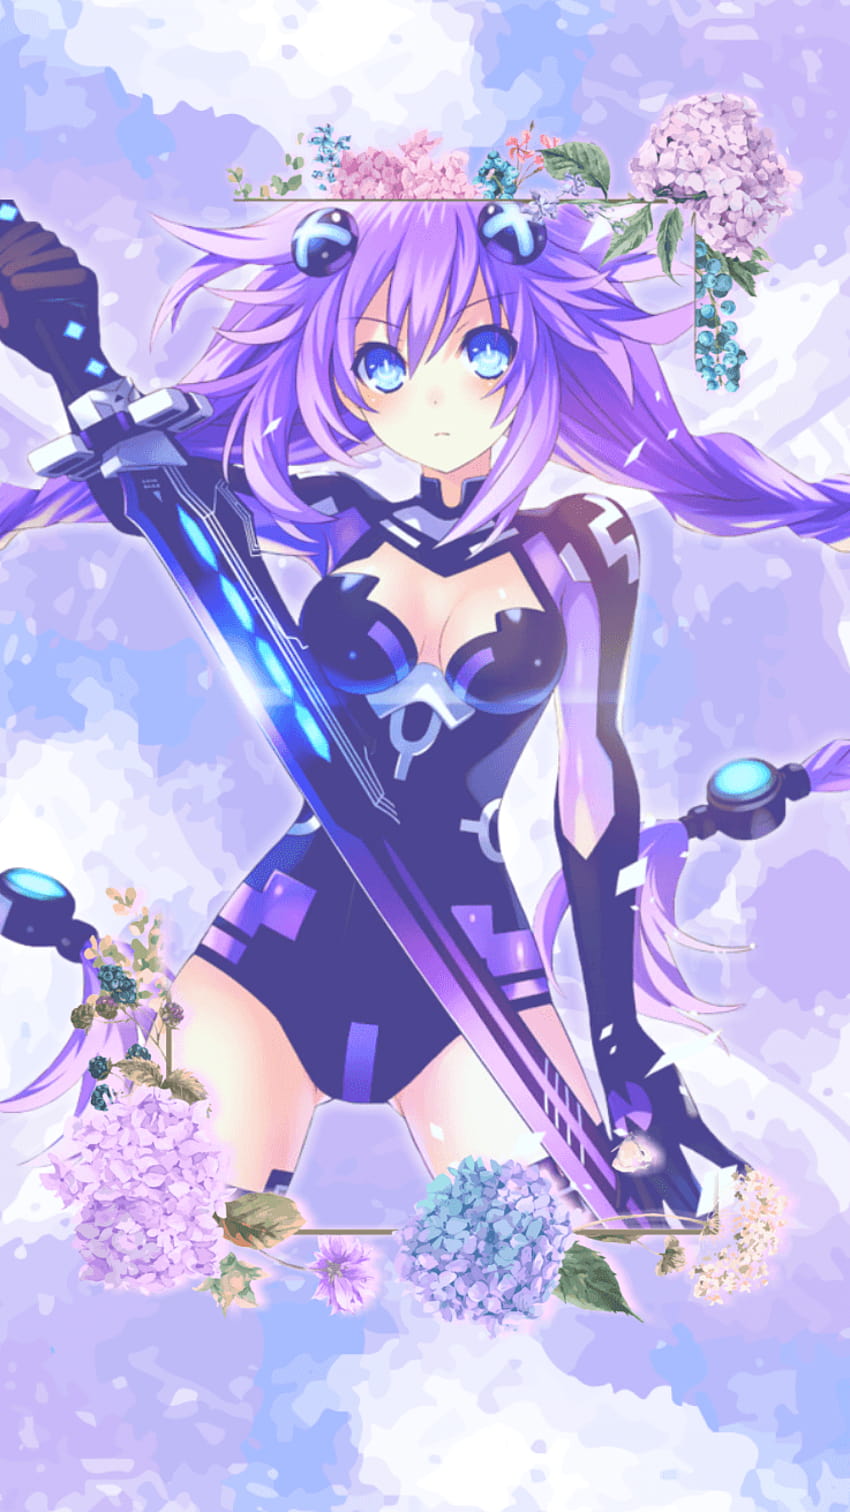 neptunia 1080P 2k 4k Full HD Wallpapers Backgrounds Free Download   Wallpaper Crafter